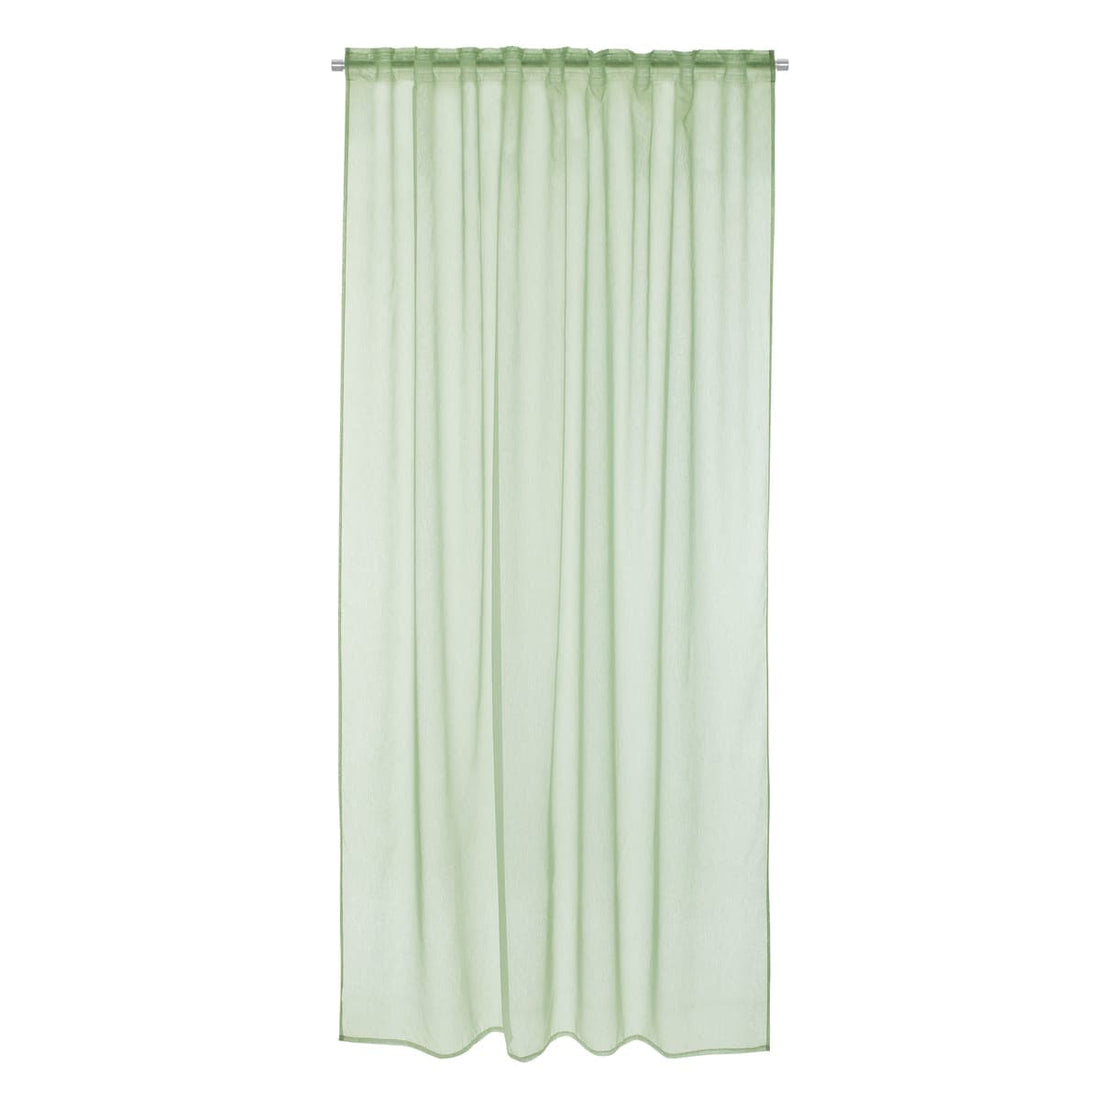 SOFTY GREEN FILTER CURTAIN 200X280 CM WITH HIDDEN LOOP AND WEBBING - best price from Maltashopper.com BR480009478